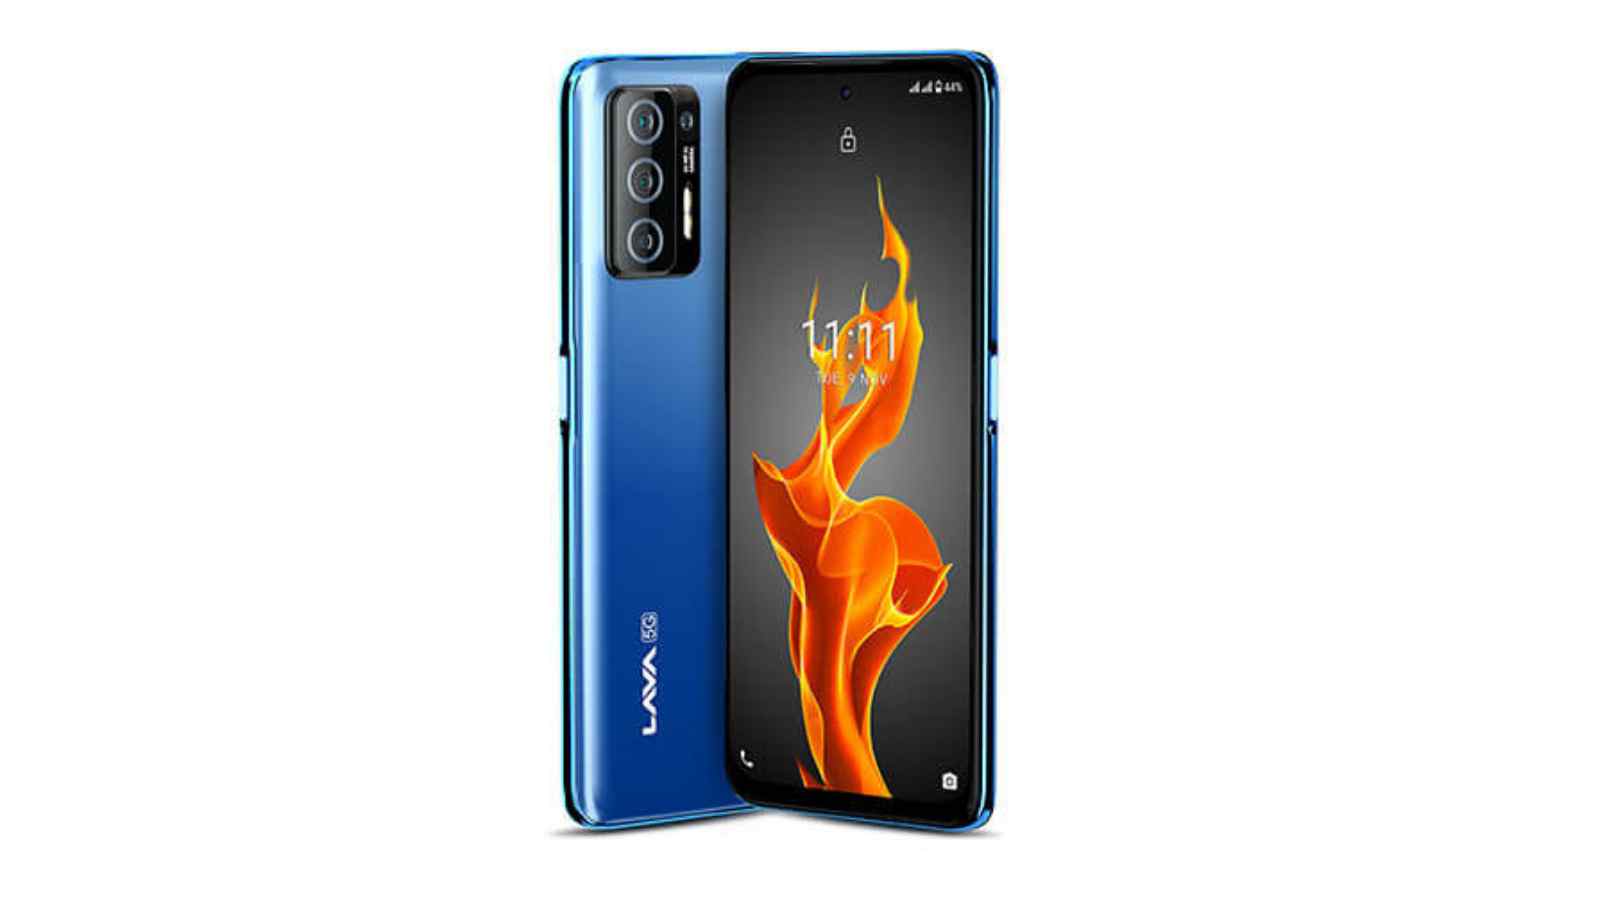 Lava Agni 5G with MediaTek Dimensity 810, 64MP quad rear camera launched in India: Price, Specifications